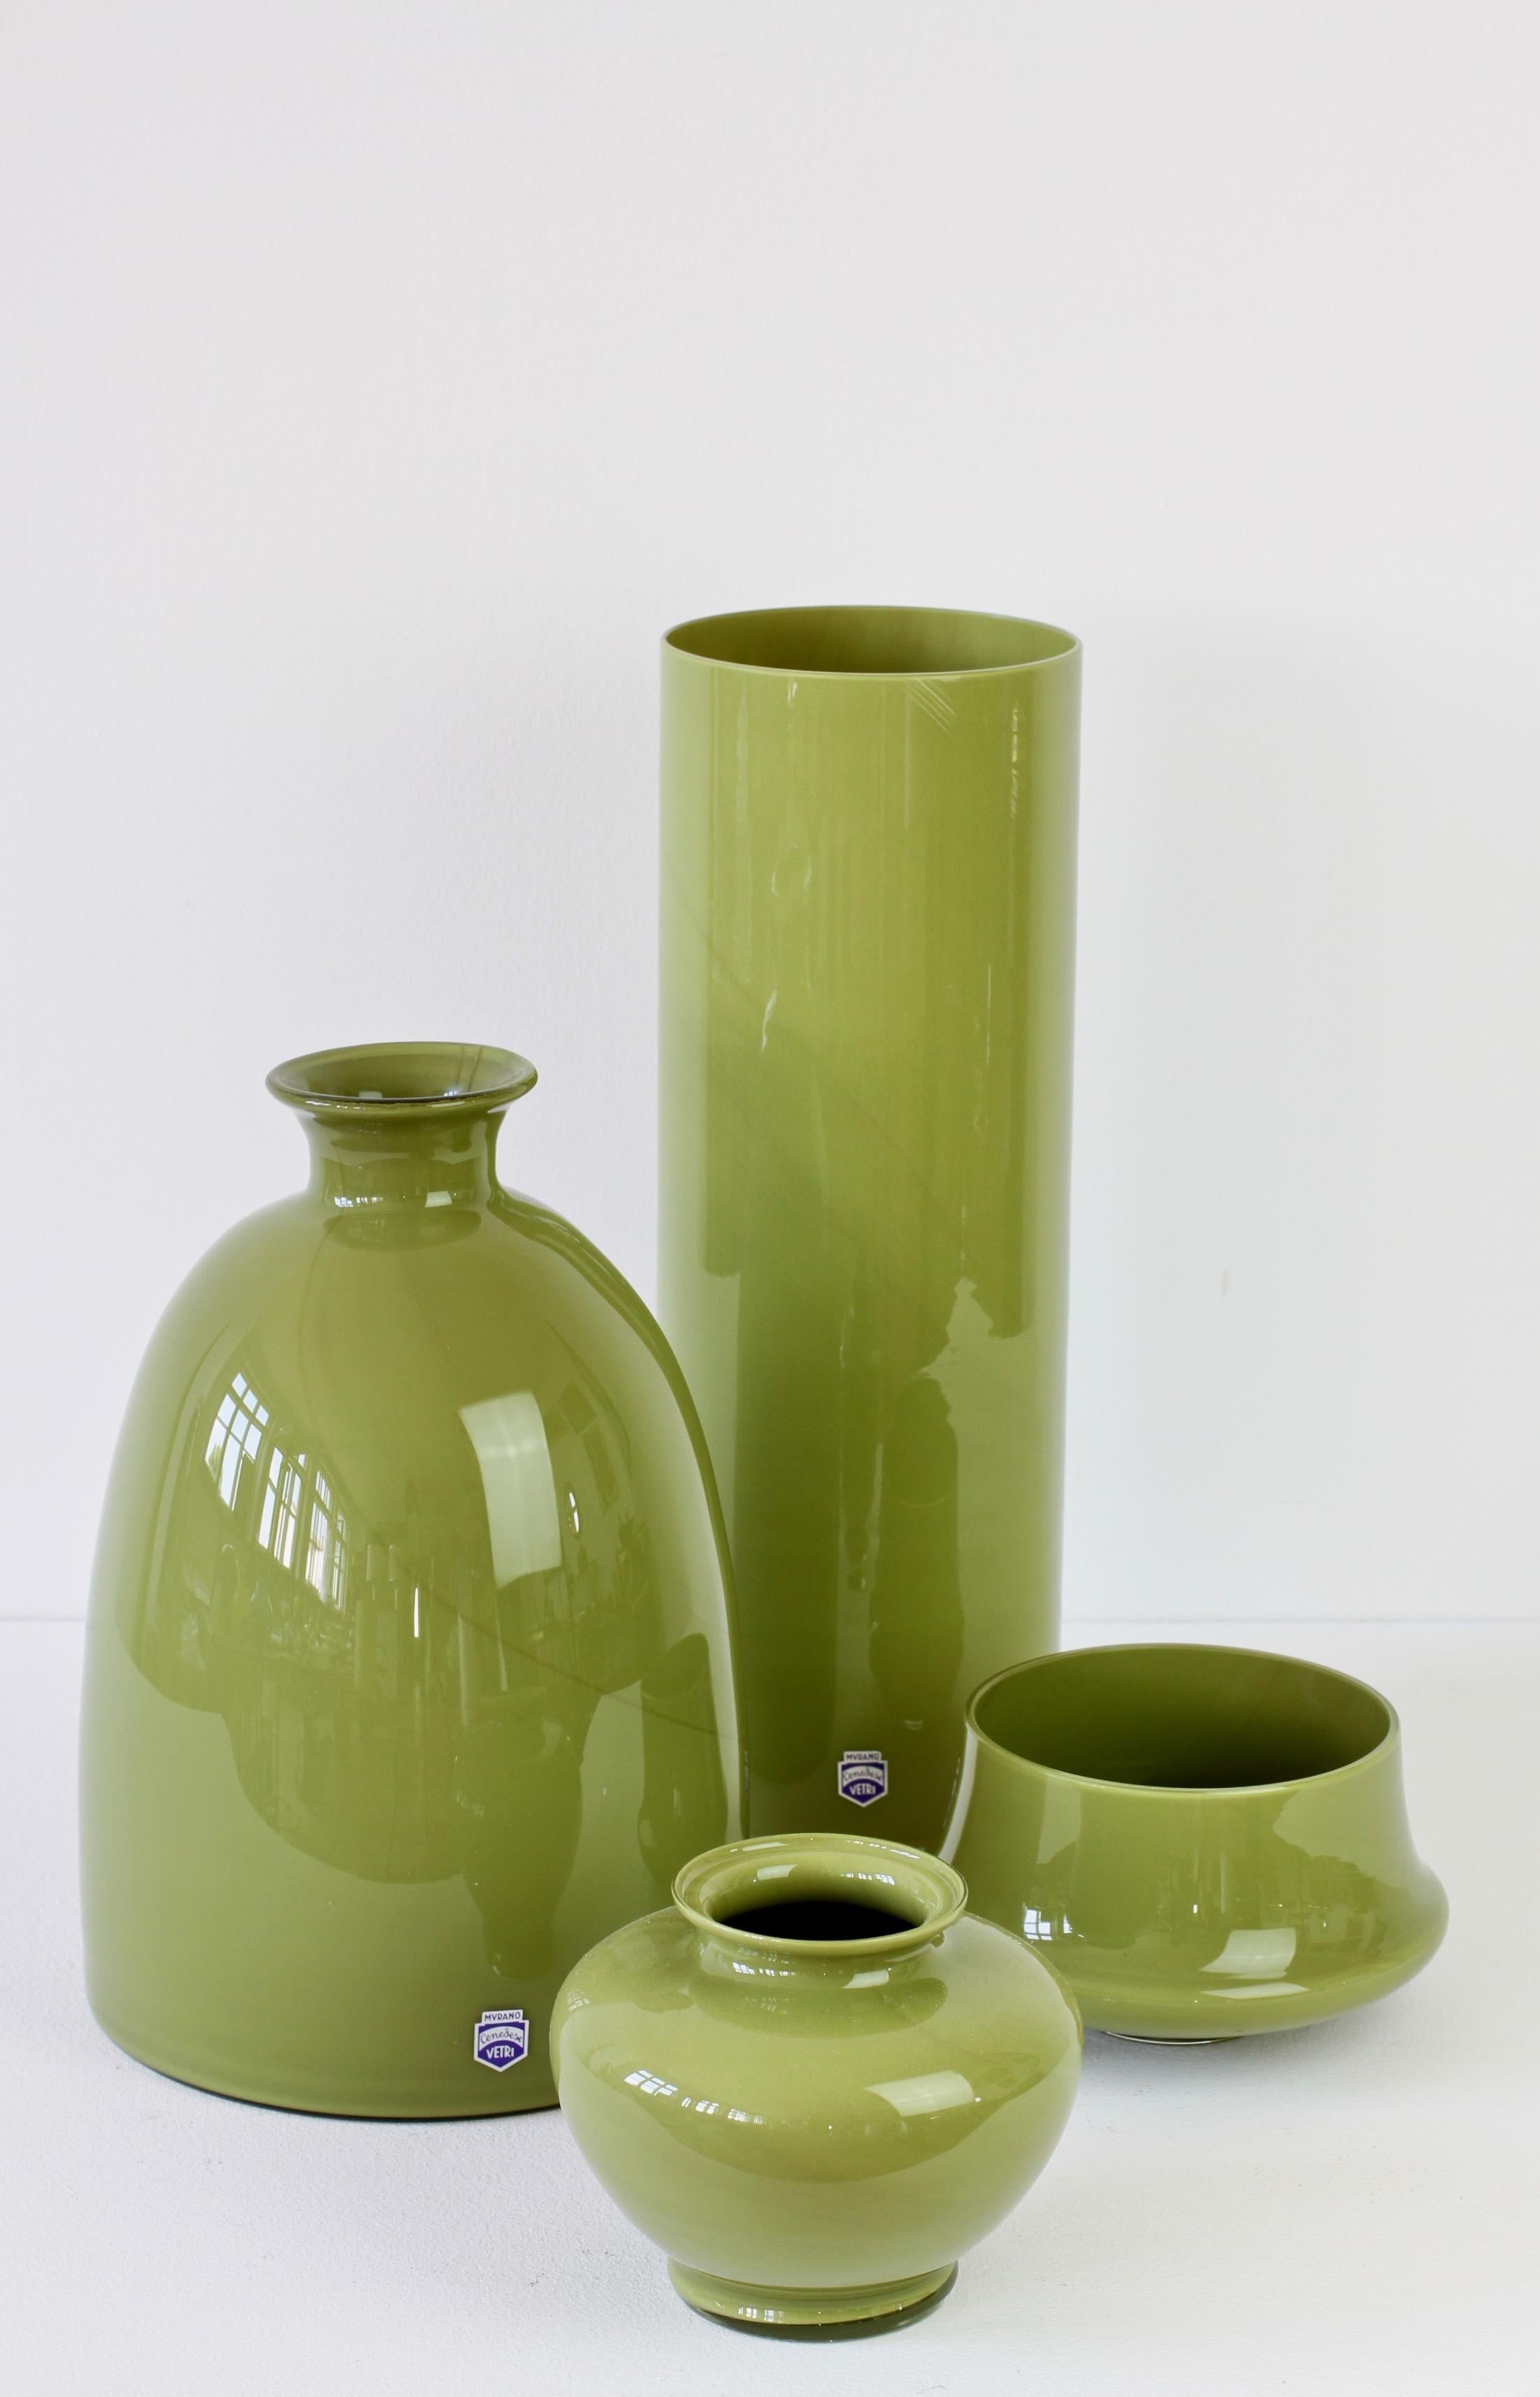 Apple or moss green Cenedese set, group, ensemble or collection of vintage Italian midcentury Murano glass vases, bowls or vessels, made in Italy, circa 1970-1990. Particularly striking are the forms and large size, they have all the characteristics